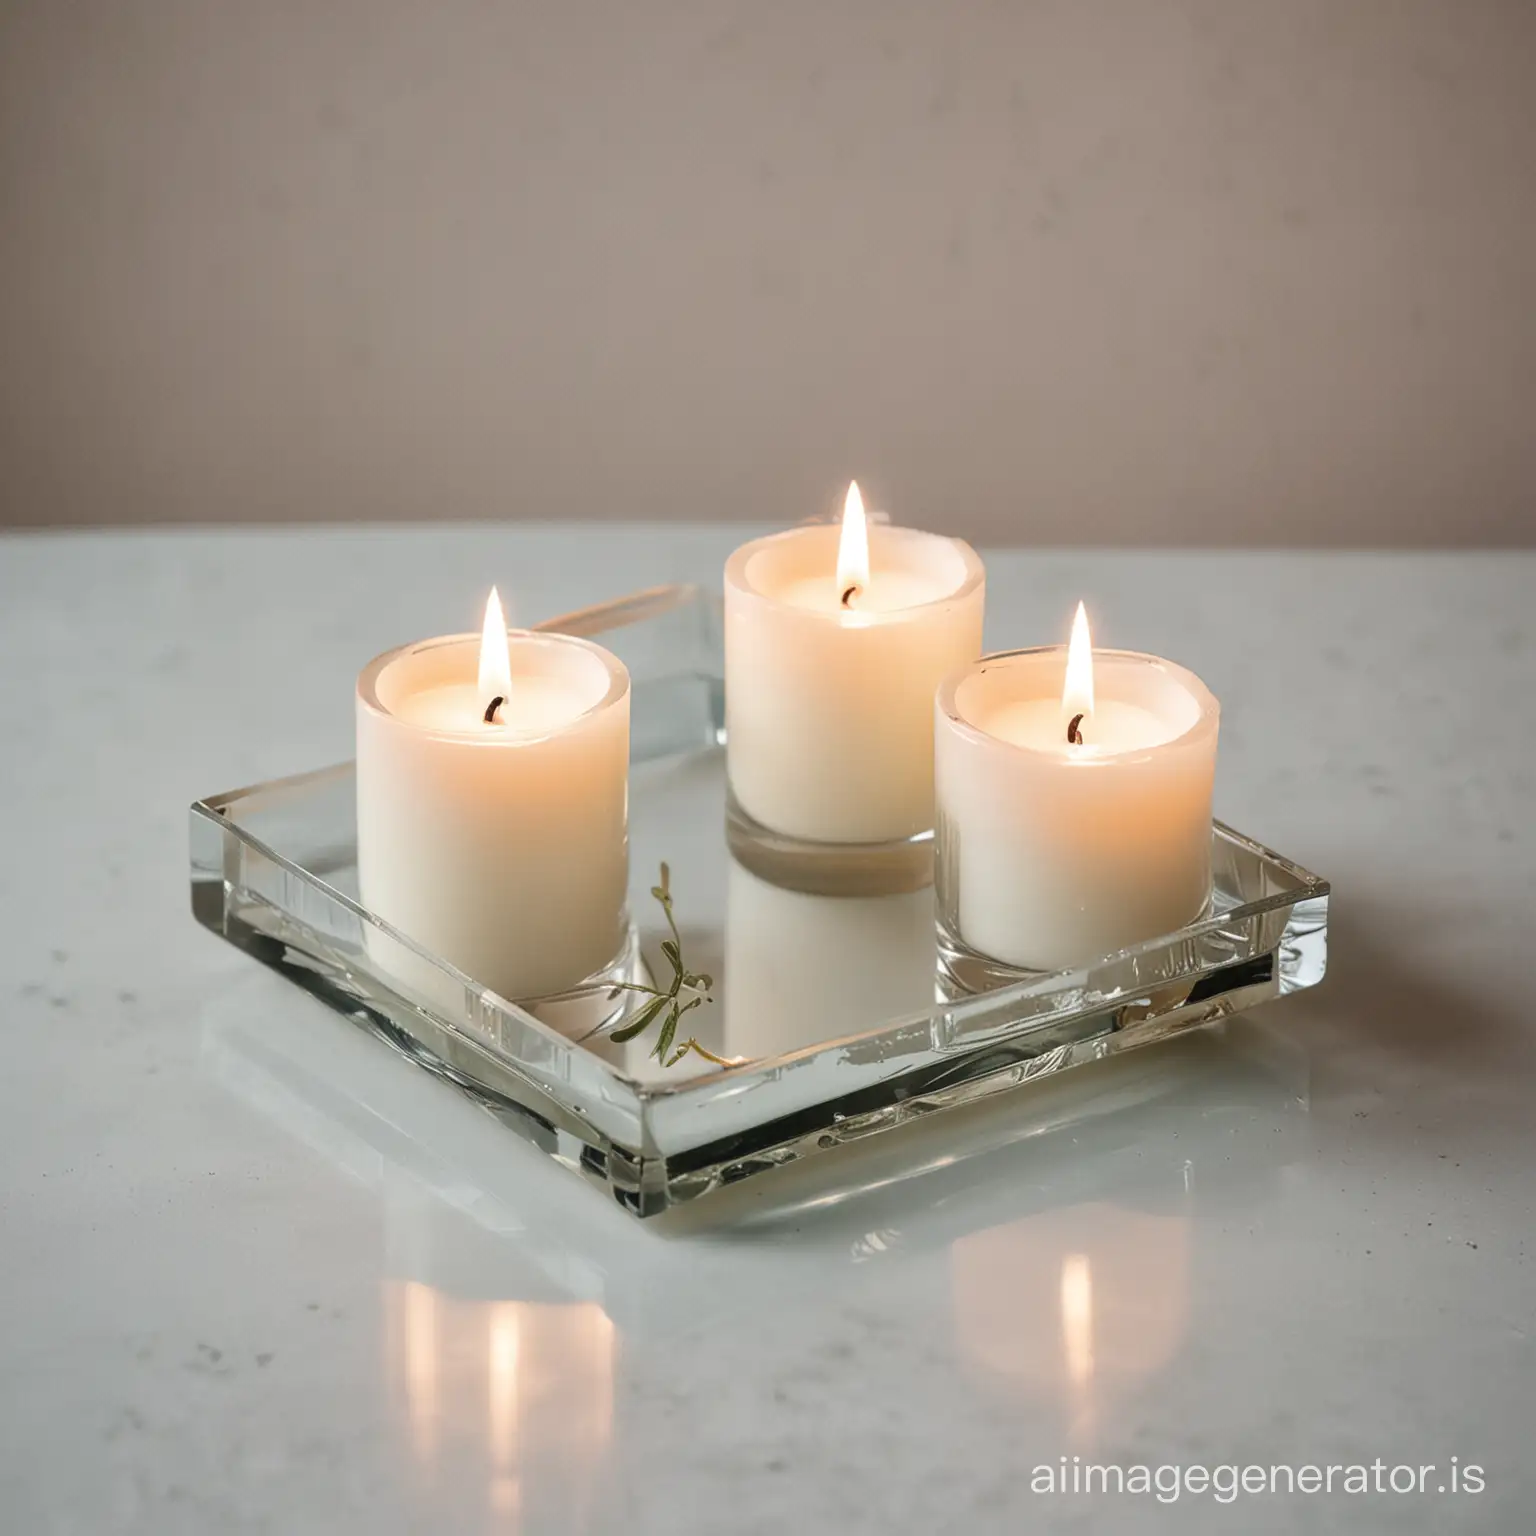 Minimalist-Wedding-Centerpiece-Trio-of-White-Candles-in-Clear-Glass